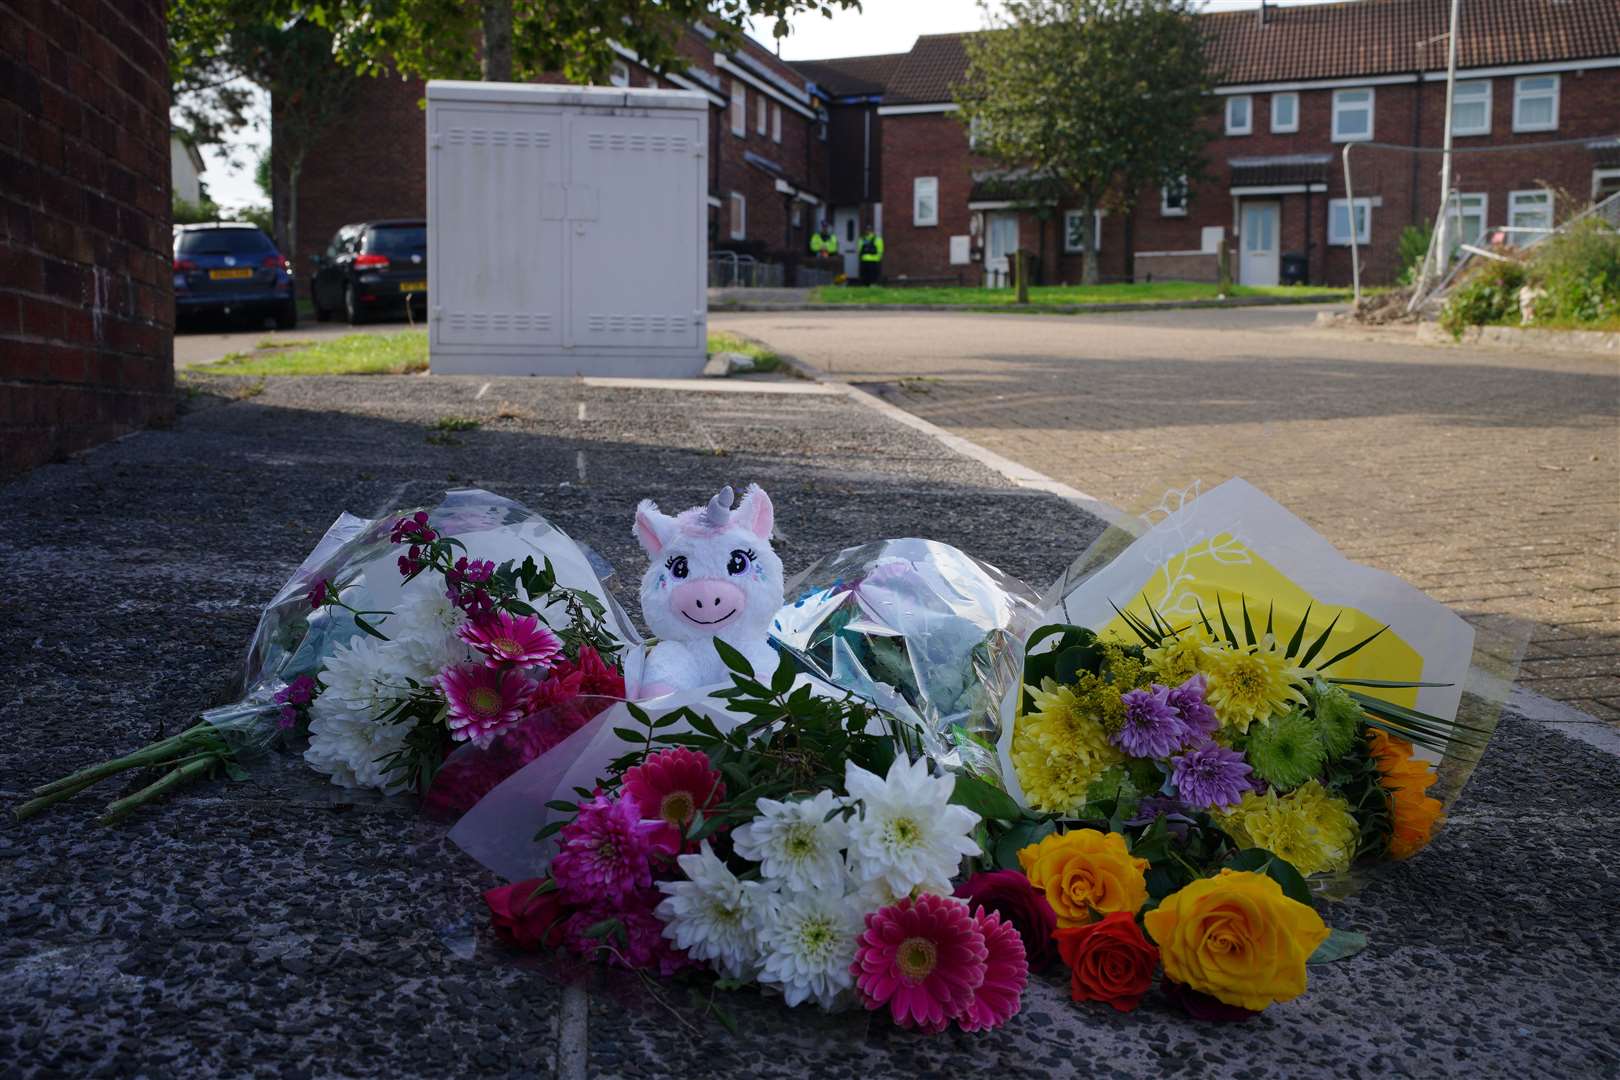 Floral tributes left in Biddick Drive, Keyham in Plymouth, Devon, where five people were killed by a gunman (Ben Birchall/PA)